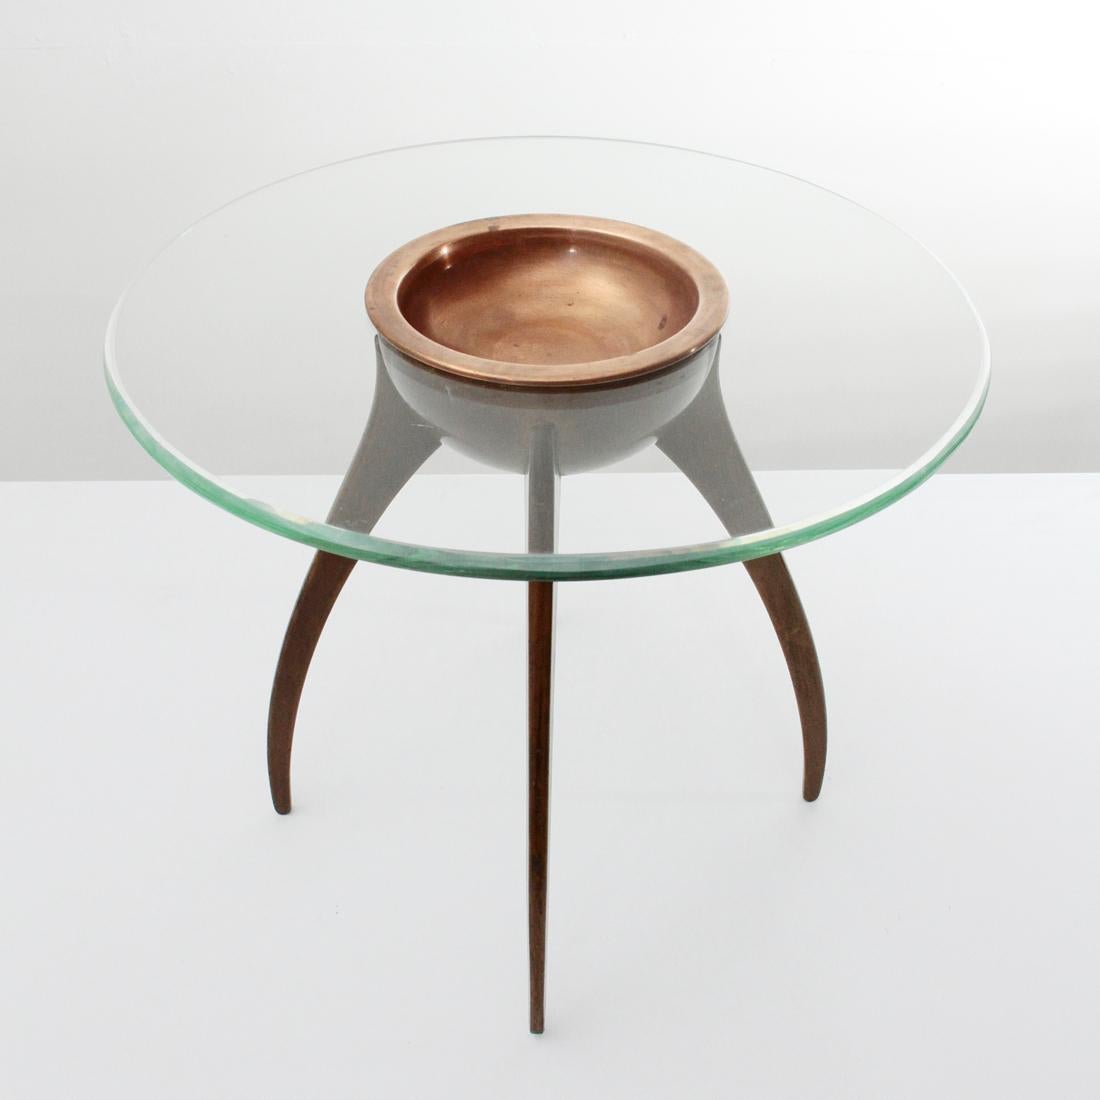 Italian manufacturing table produced in the 1940s.
Structure in shaped wood.
Circular glass top with a tapered edge.
Central copper cup, removable. 
Good general conditions, some signs due to normal use over time.

Dimensions: Diameter 42 cm,